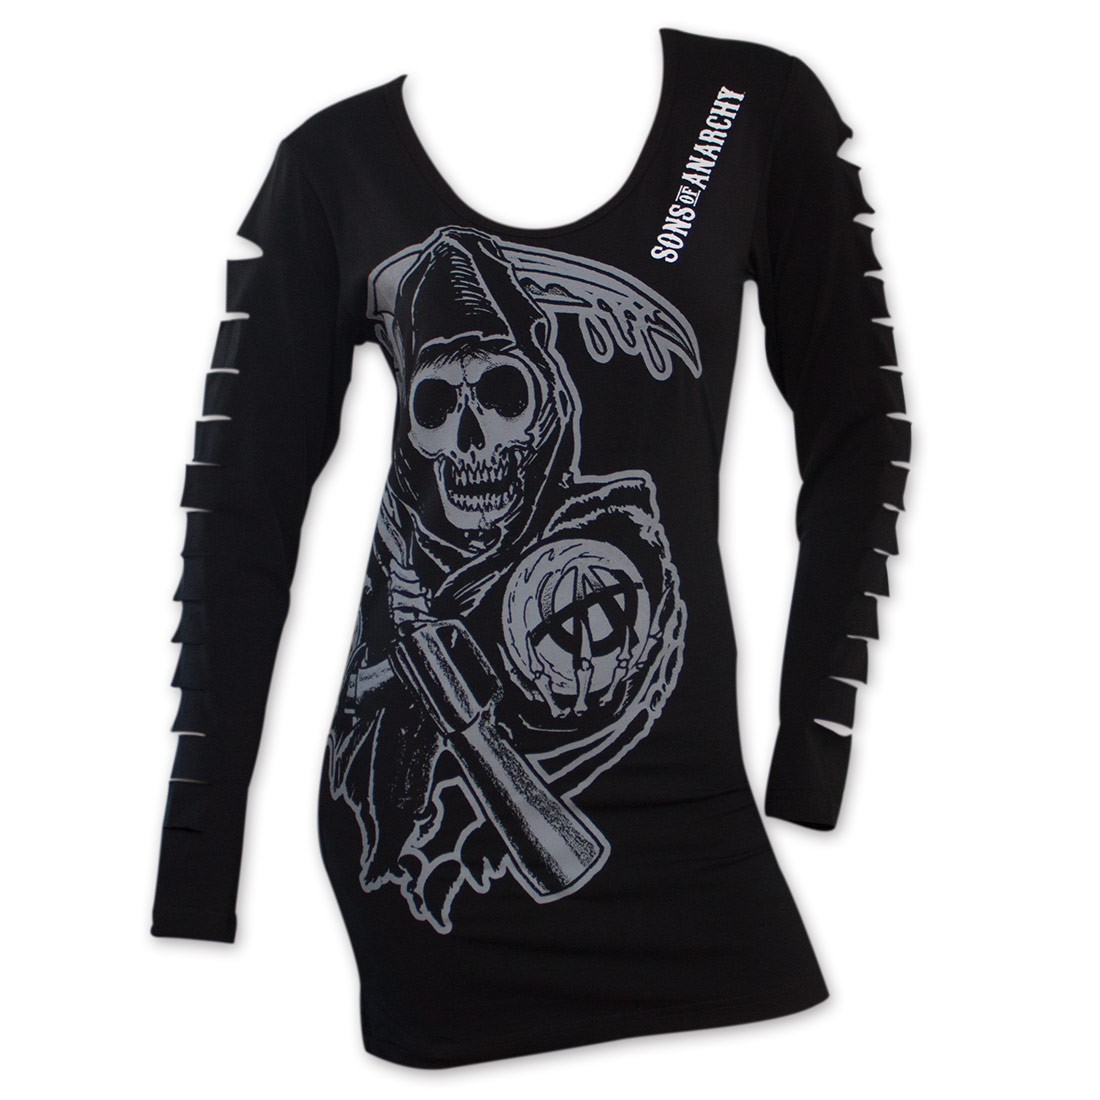 Women's Sons of Anarchy Grim Reaper Ripped Sleeve Shirt